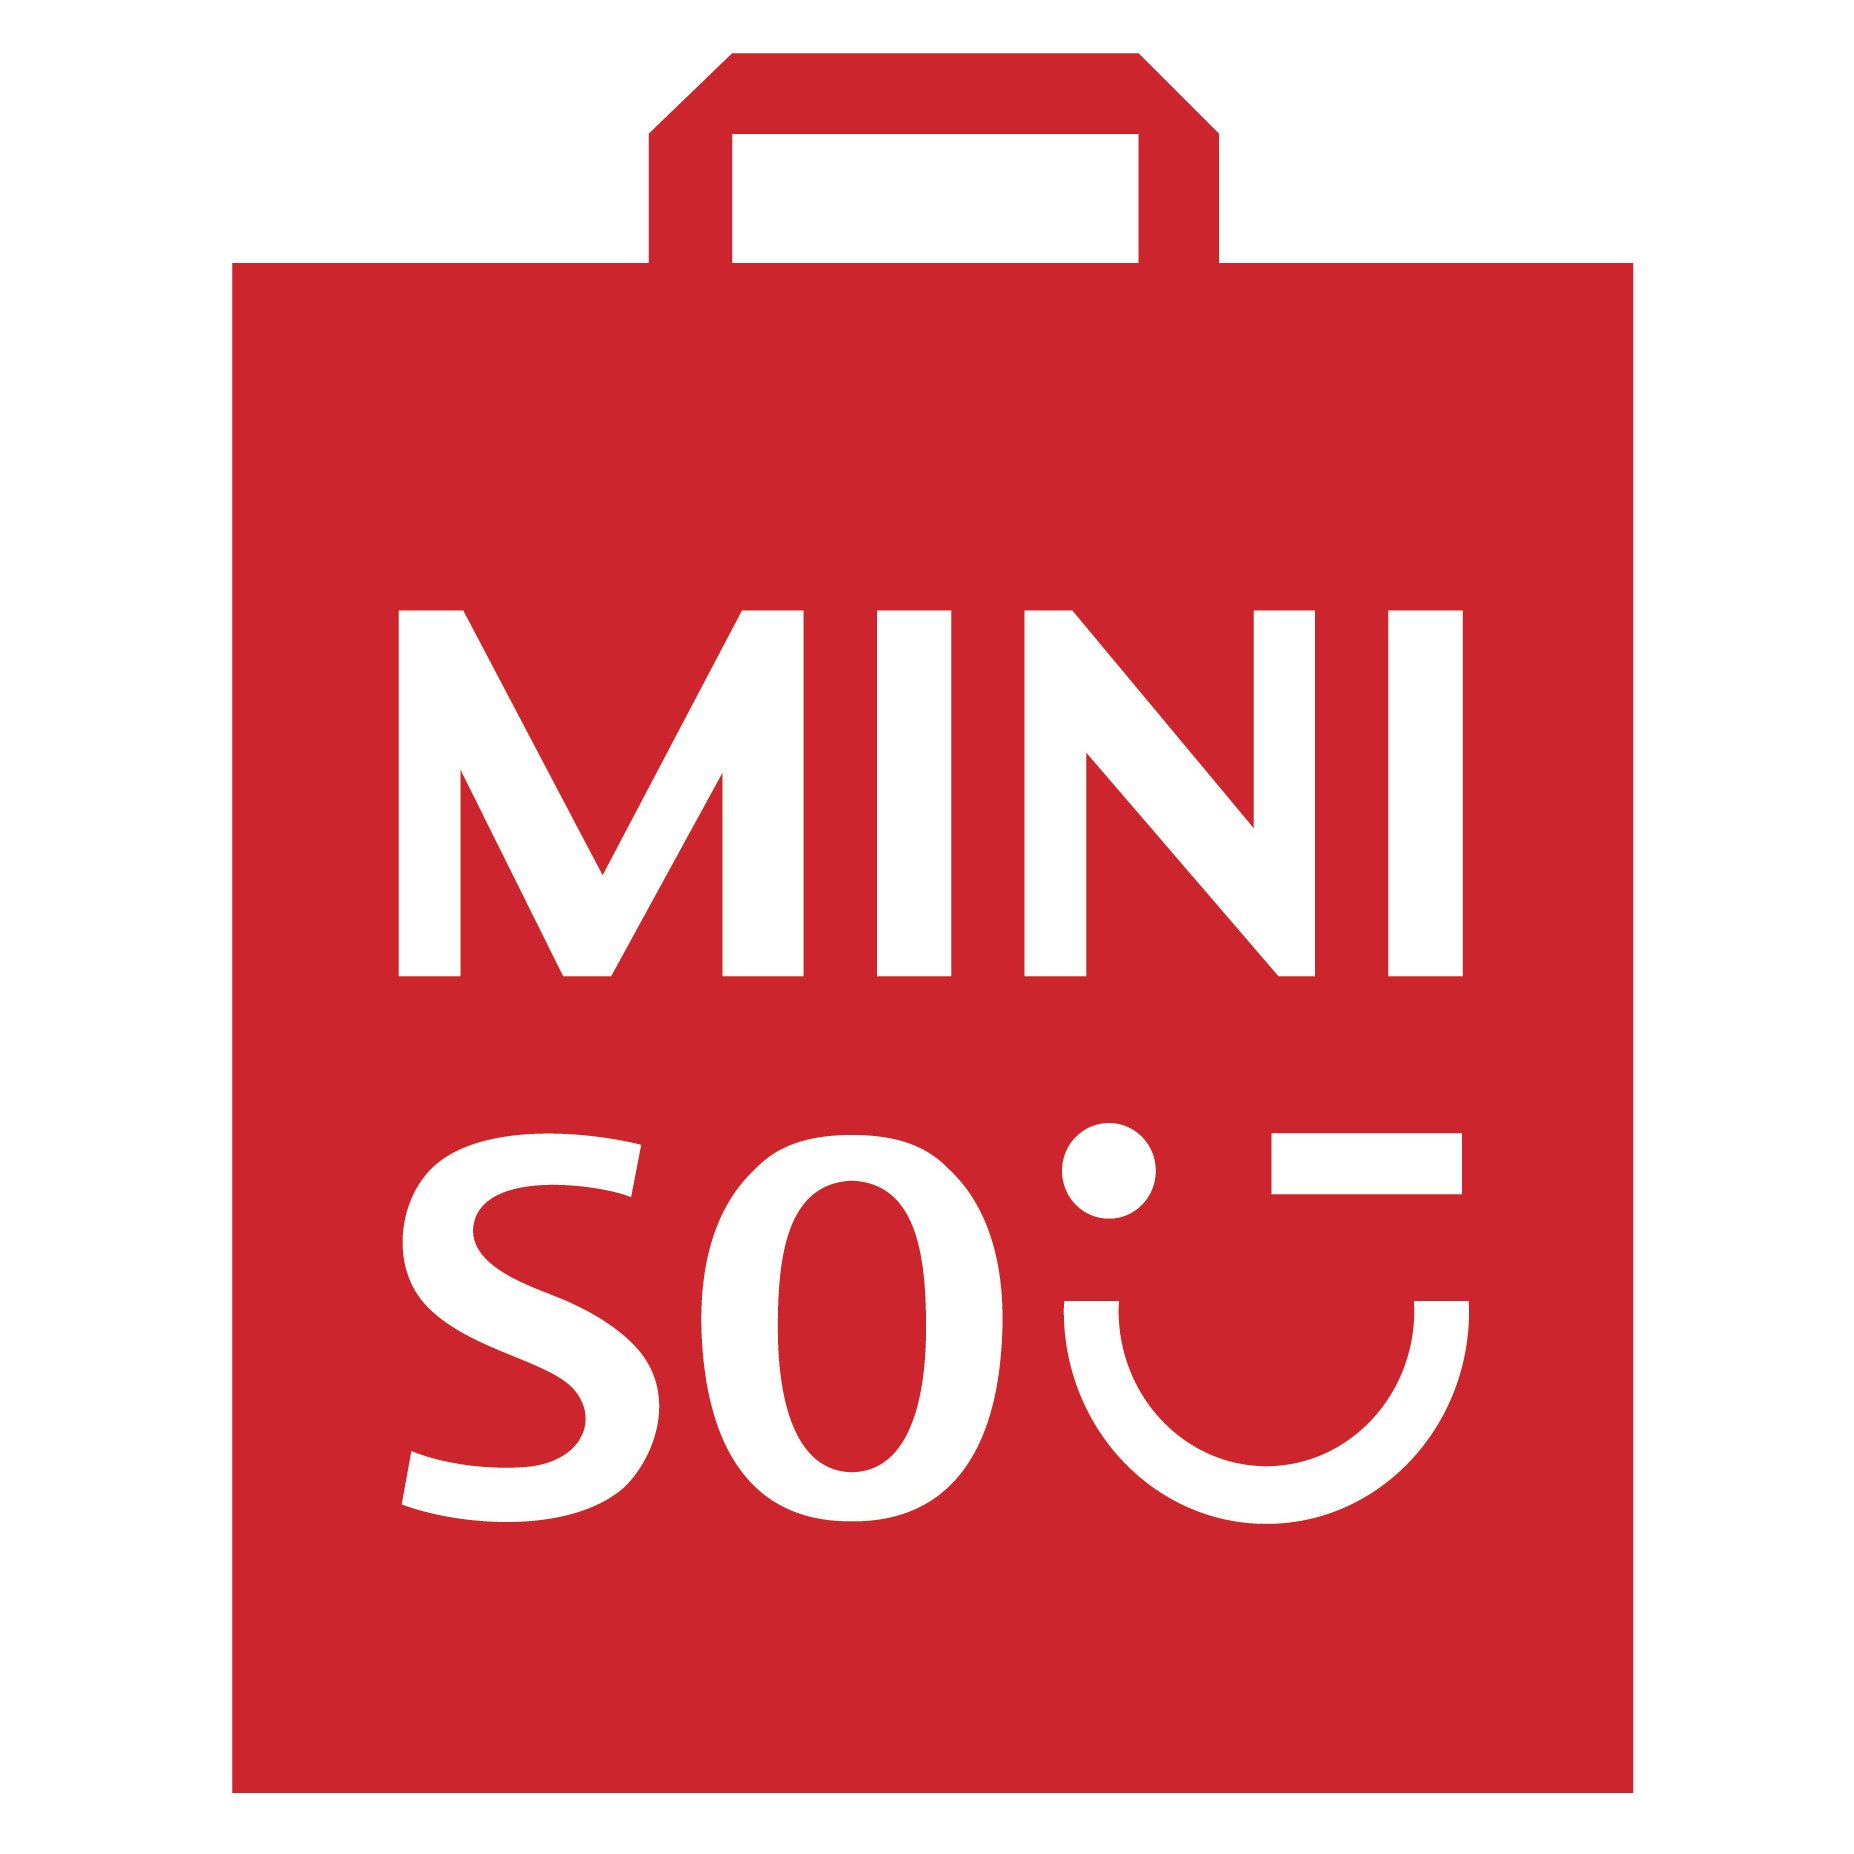 Life is for fun, miniso!
https://t.co/bKpAx01Jy5